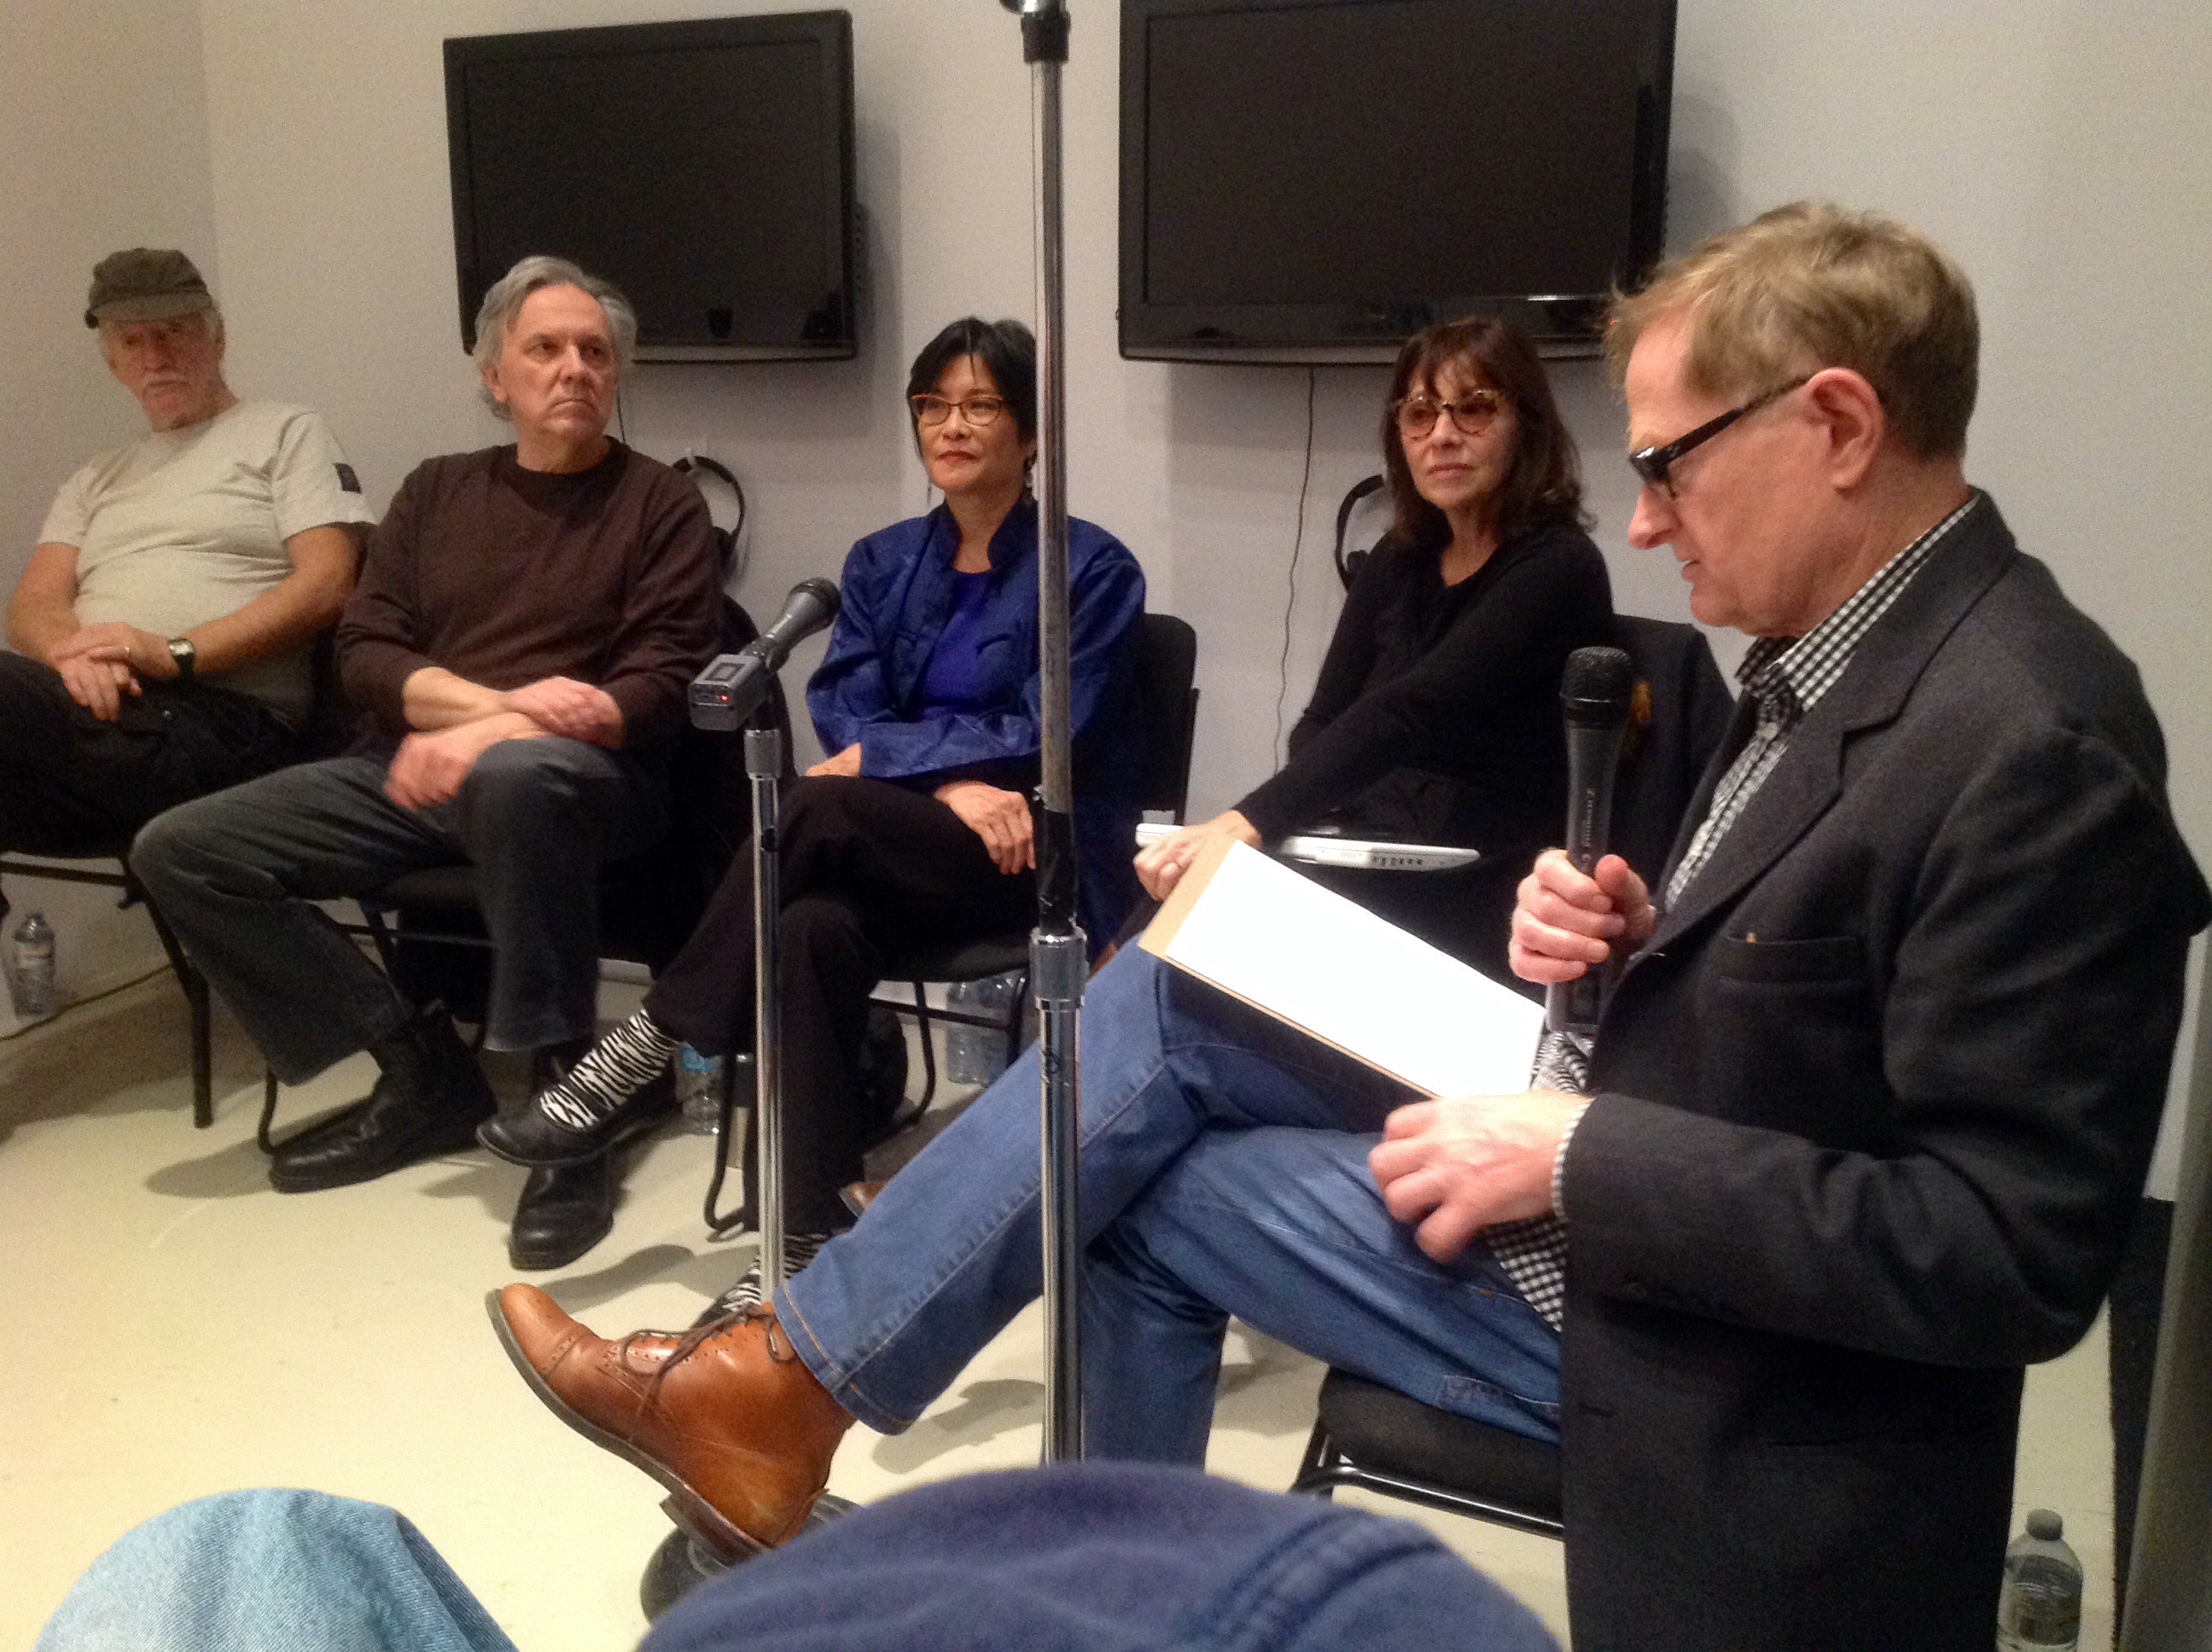 Ron Giii, Peter Dudar, Lily Eng, Diane Boadway, Philip Monk, CEAC Panel 1, AGYU, Oct 2014